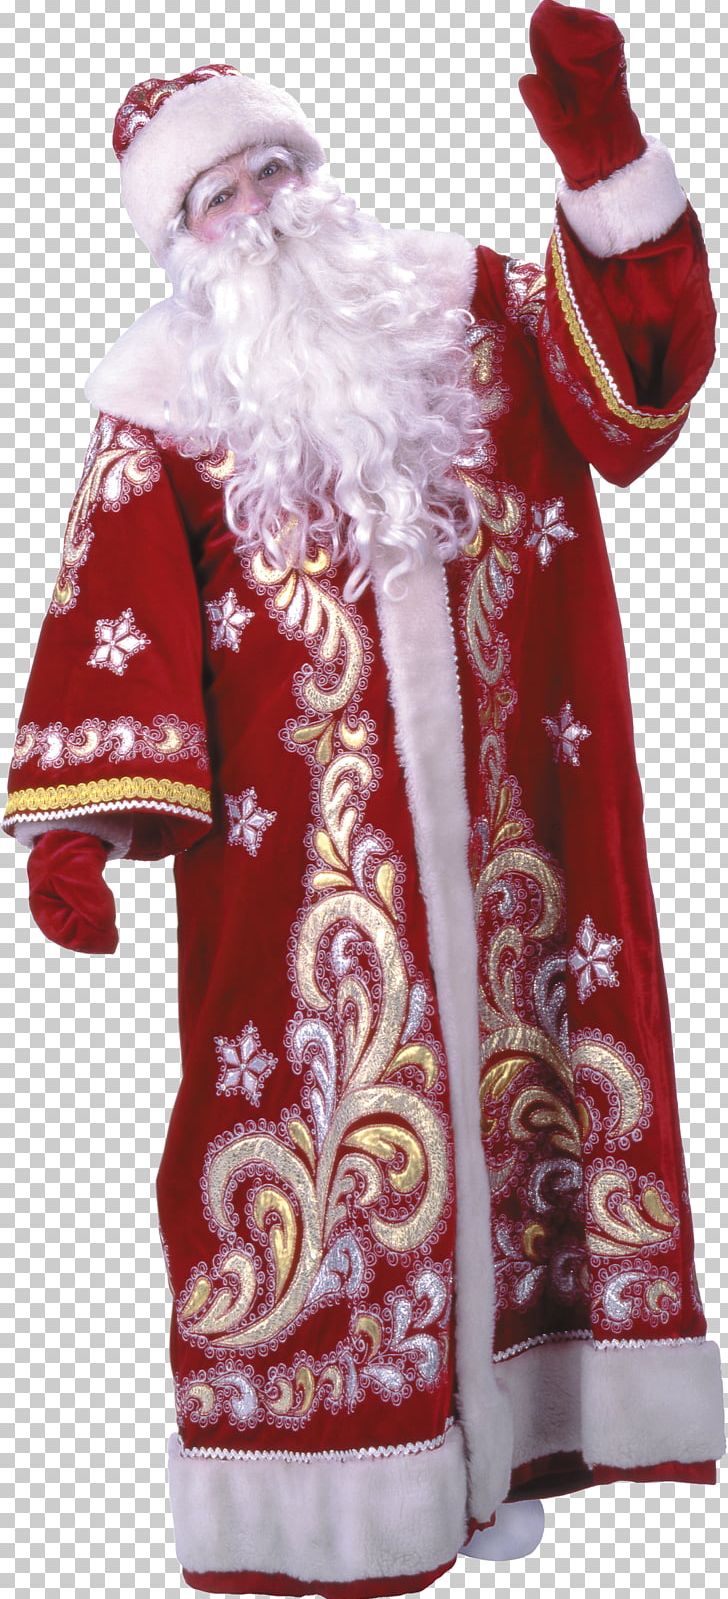 Ded Moroz Snegurochka New Year Tree Santa Claus PNG, Clipart, Child, Christmas, Christmas Ornament, Costume, Costume Design Free PNG Download